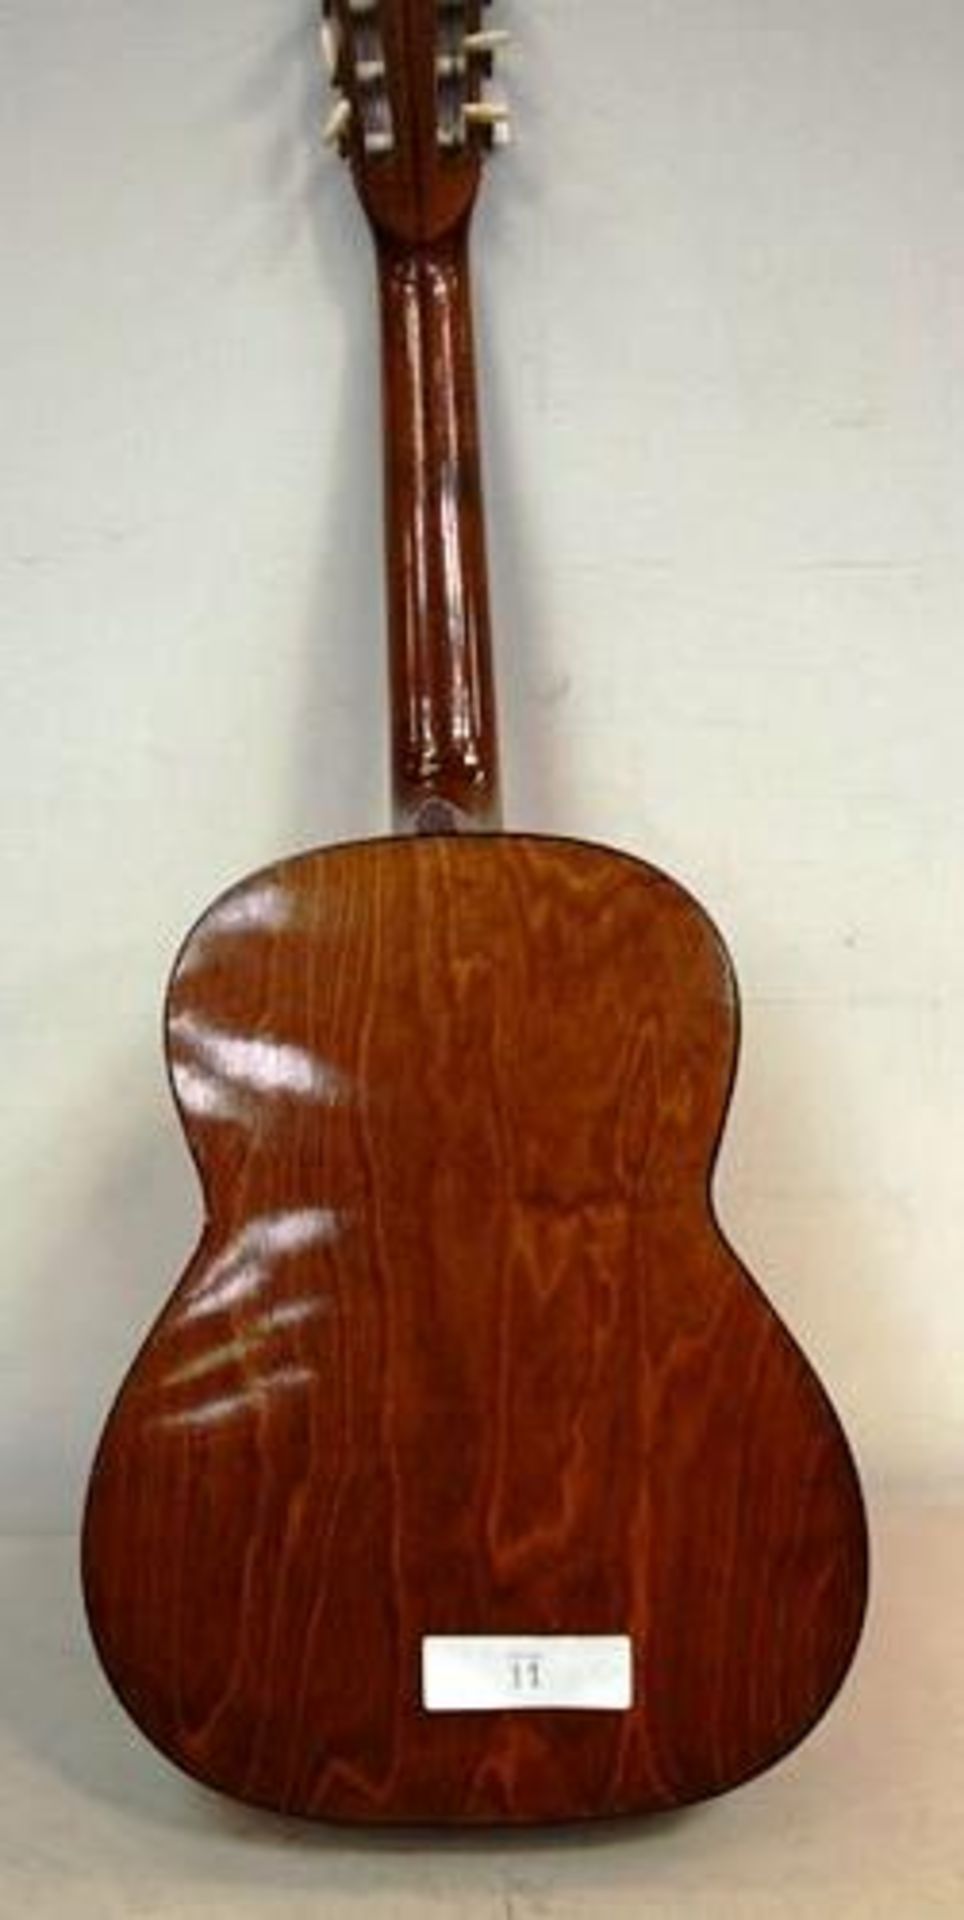 1 x Deluxe Tatra classic foreign acoustic guitar - Second-hand (ES1) - Image 4 of 4